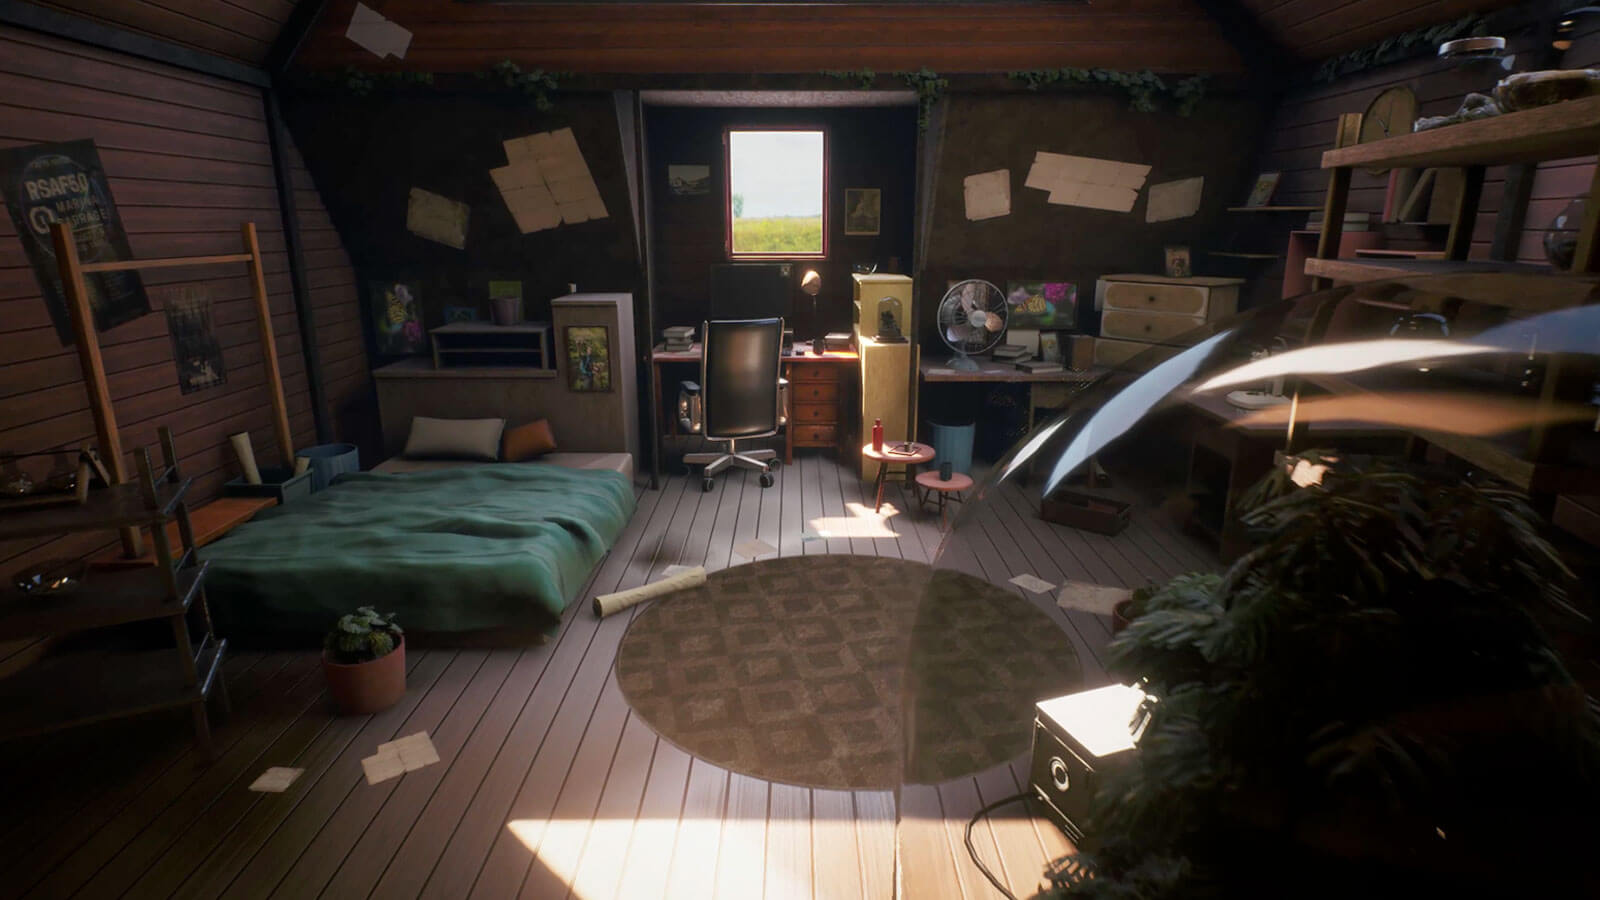 3D view from behind a terrarium, depicting the bedroom from a downward angle